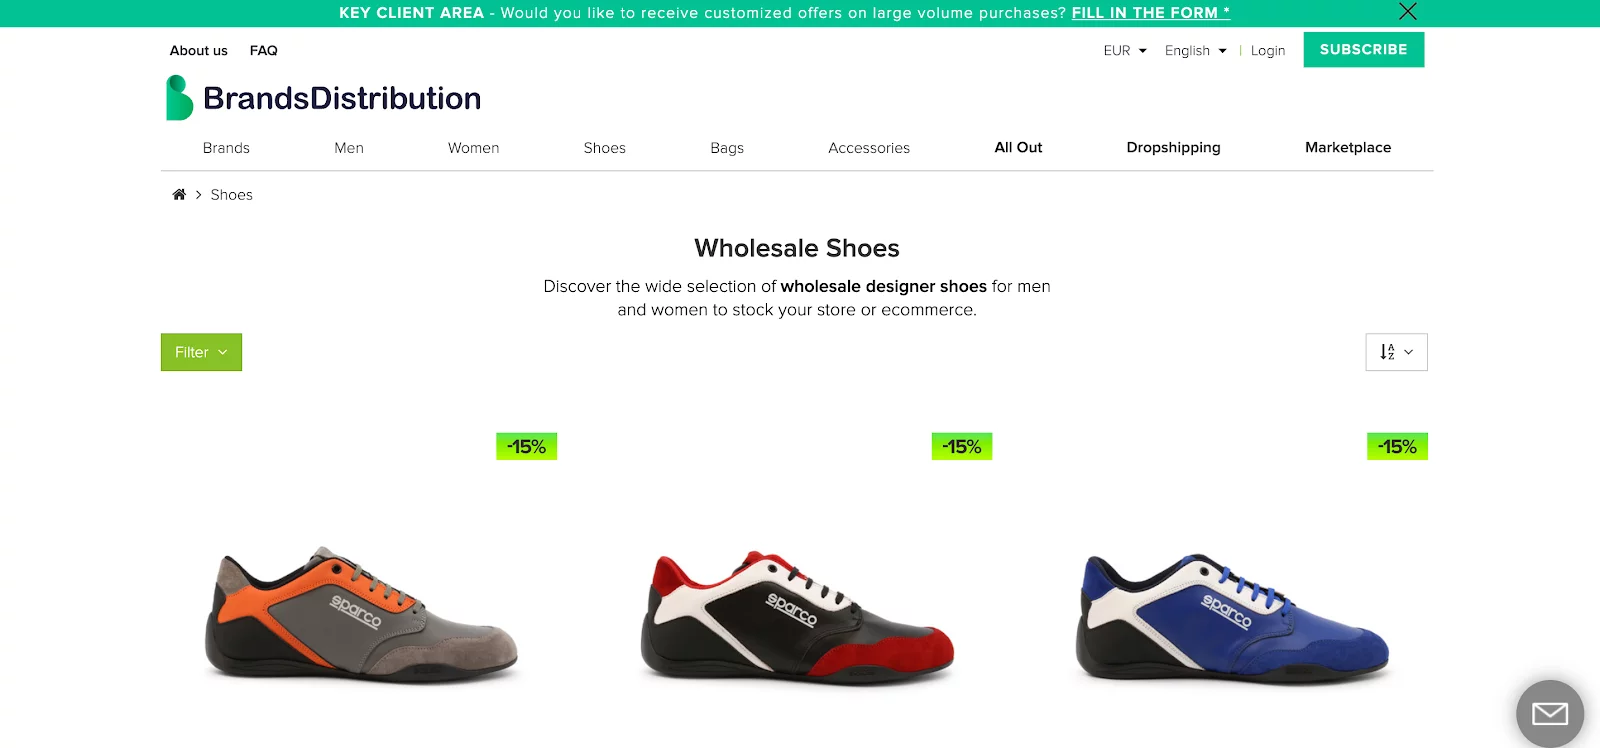 Dropshipping Shoe Suppliers - BrandsDistribution